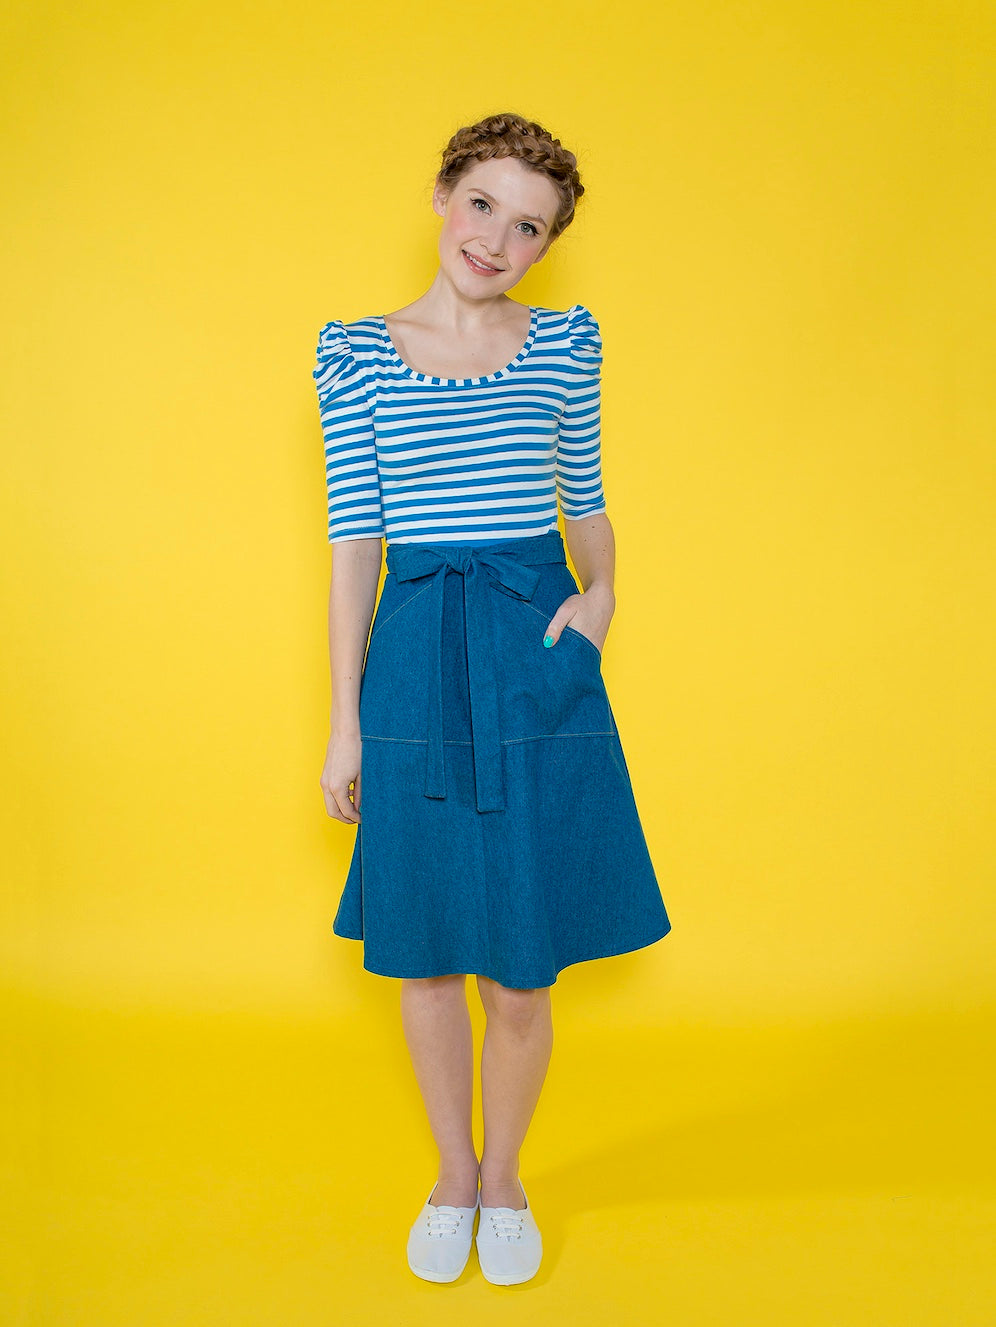 Woman wearing the Miette Skirt sewing pattern from Tilly and the Buttons on The Fold Line. A wrap skirt pattern made in denim, linen, or cotton fabric, featuring a gently flared shape, ties that wrap around and tie at the front in a bow, patch pockets, an